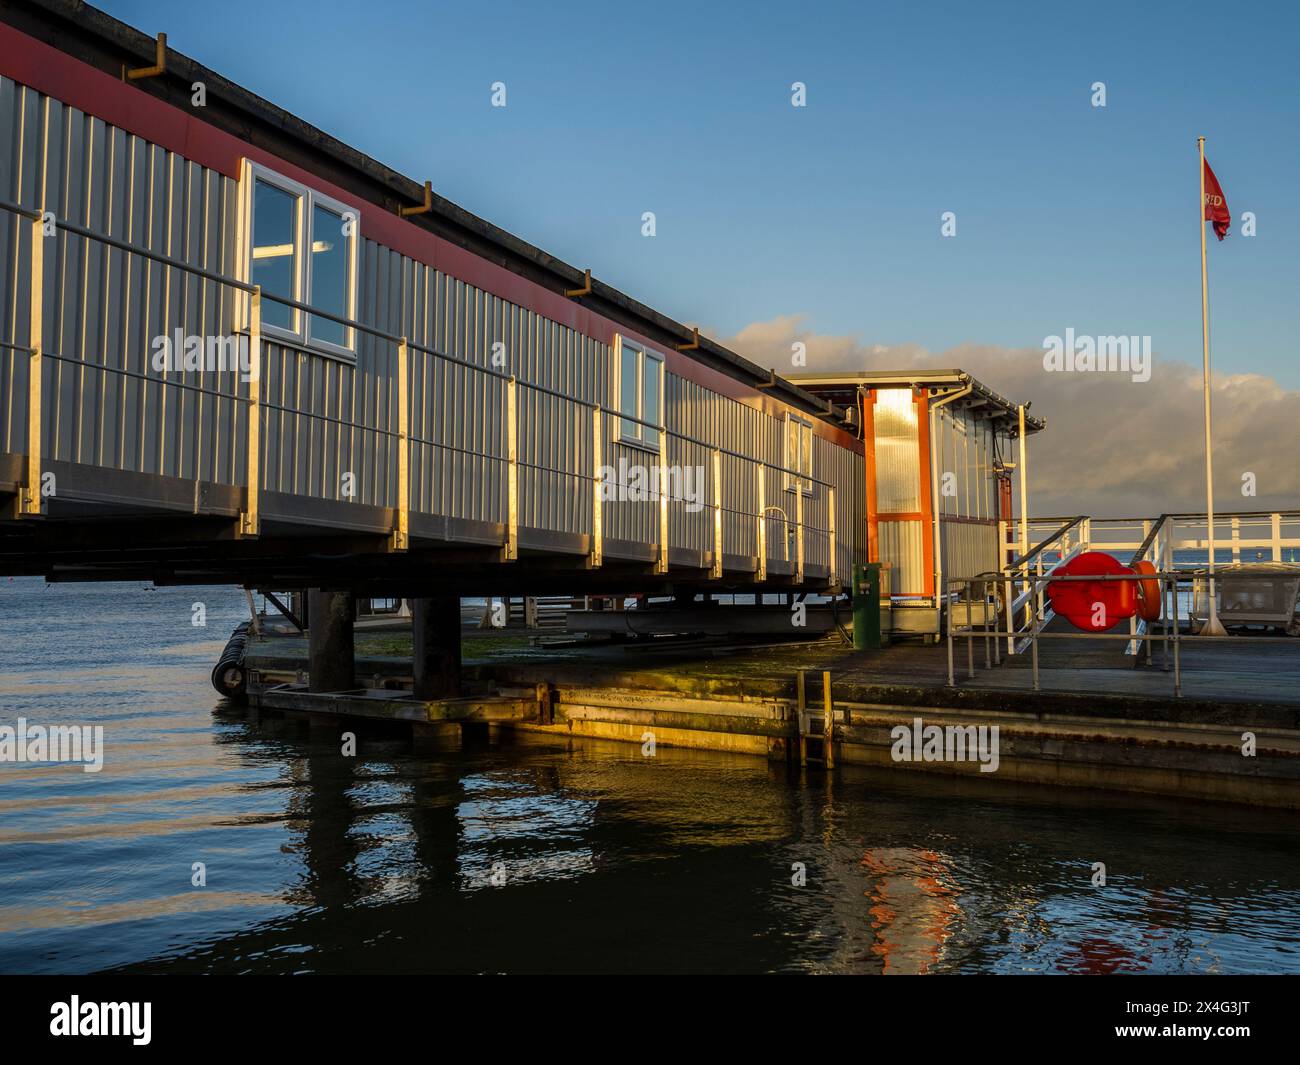 Jetty for the Red Jet, Cowes Harbour, Cowes, Isle of Wight, England, UK, GB. Stock Photo